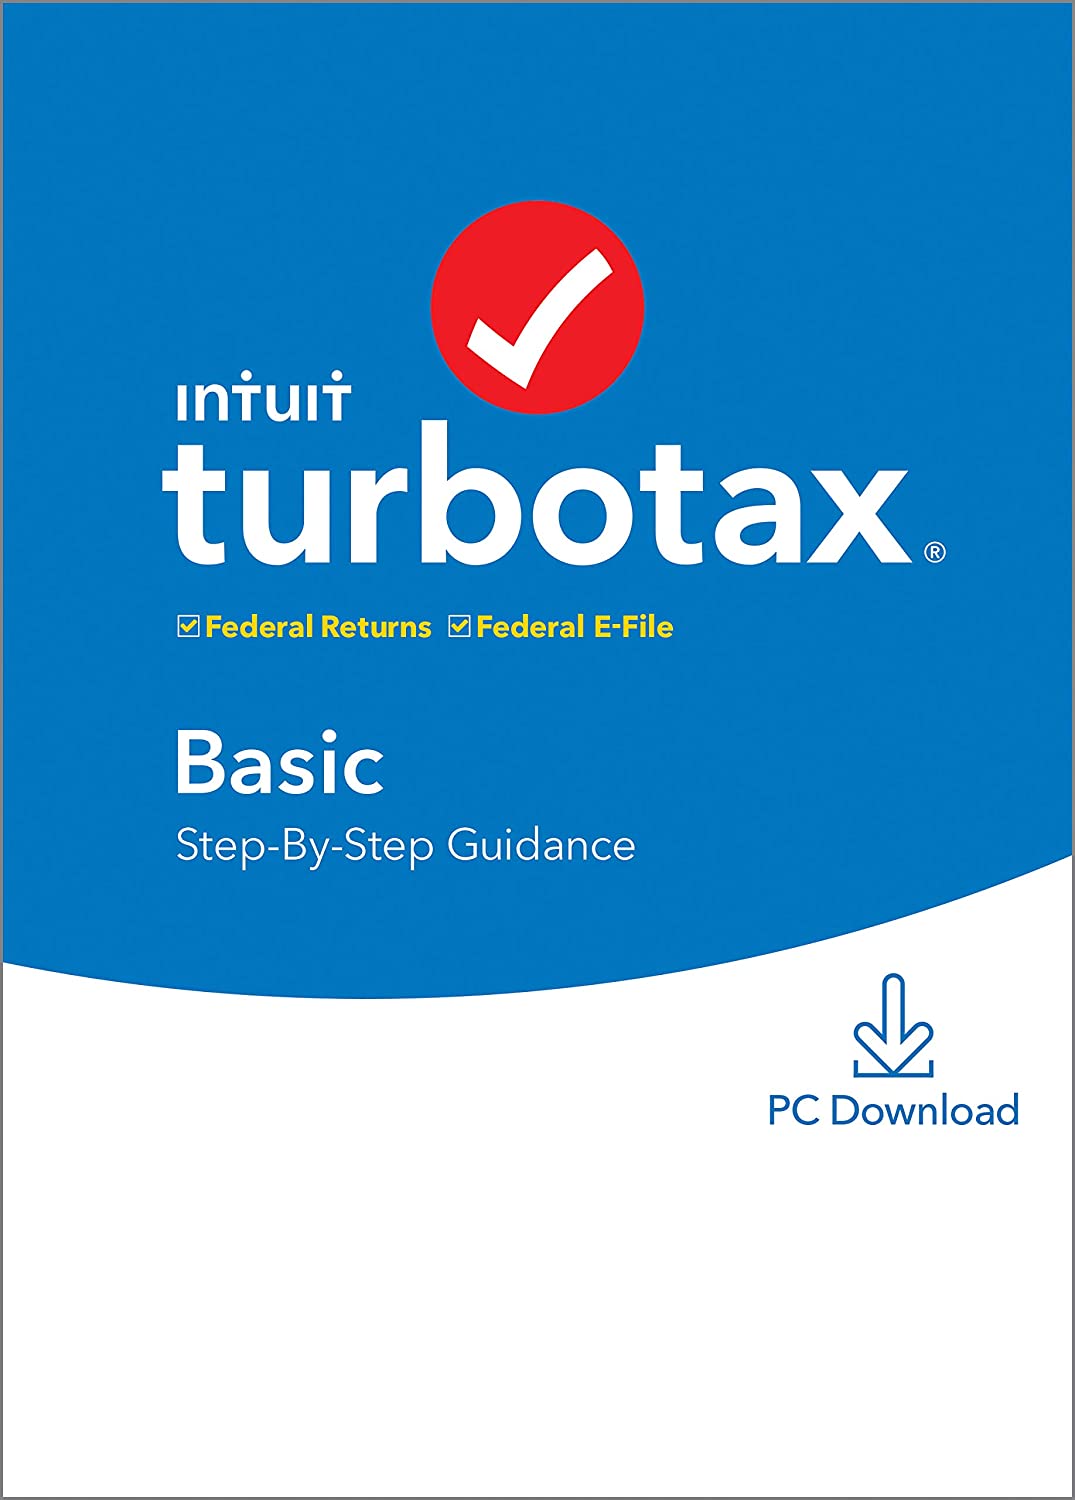 Turbotax Download For Mac 2019